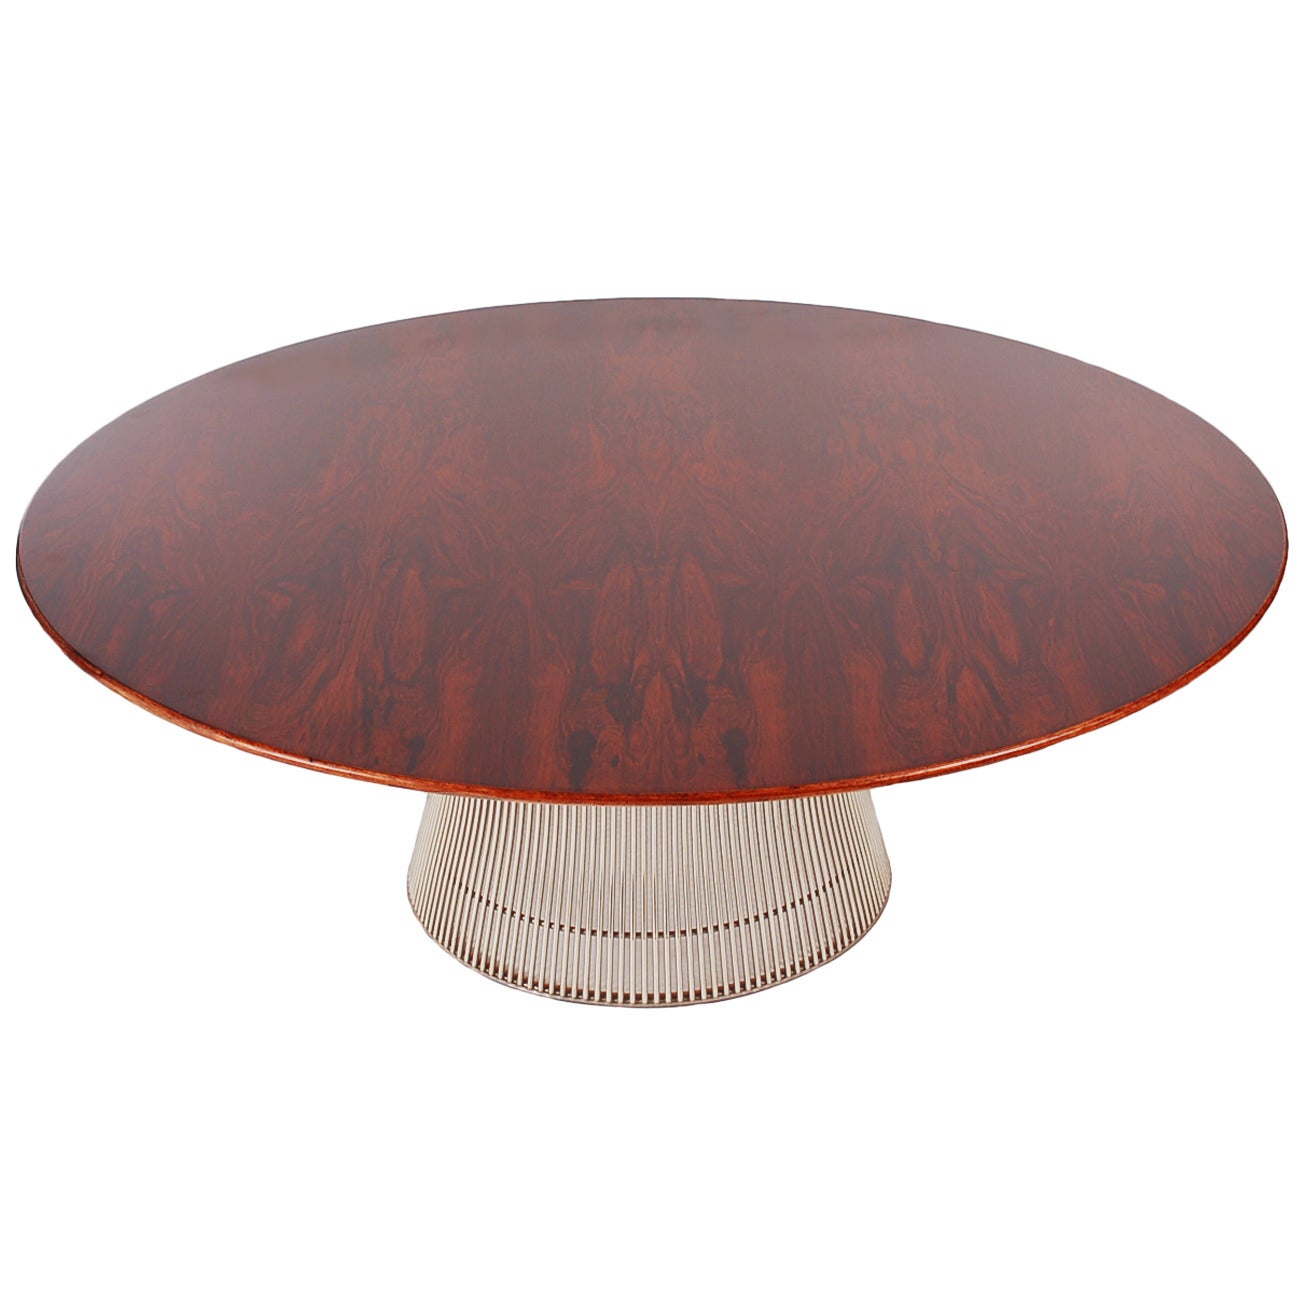 Rare Exquisite 1974 Rosewood Cocktail Table by Warren Platner for Knoll